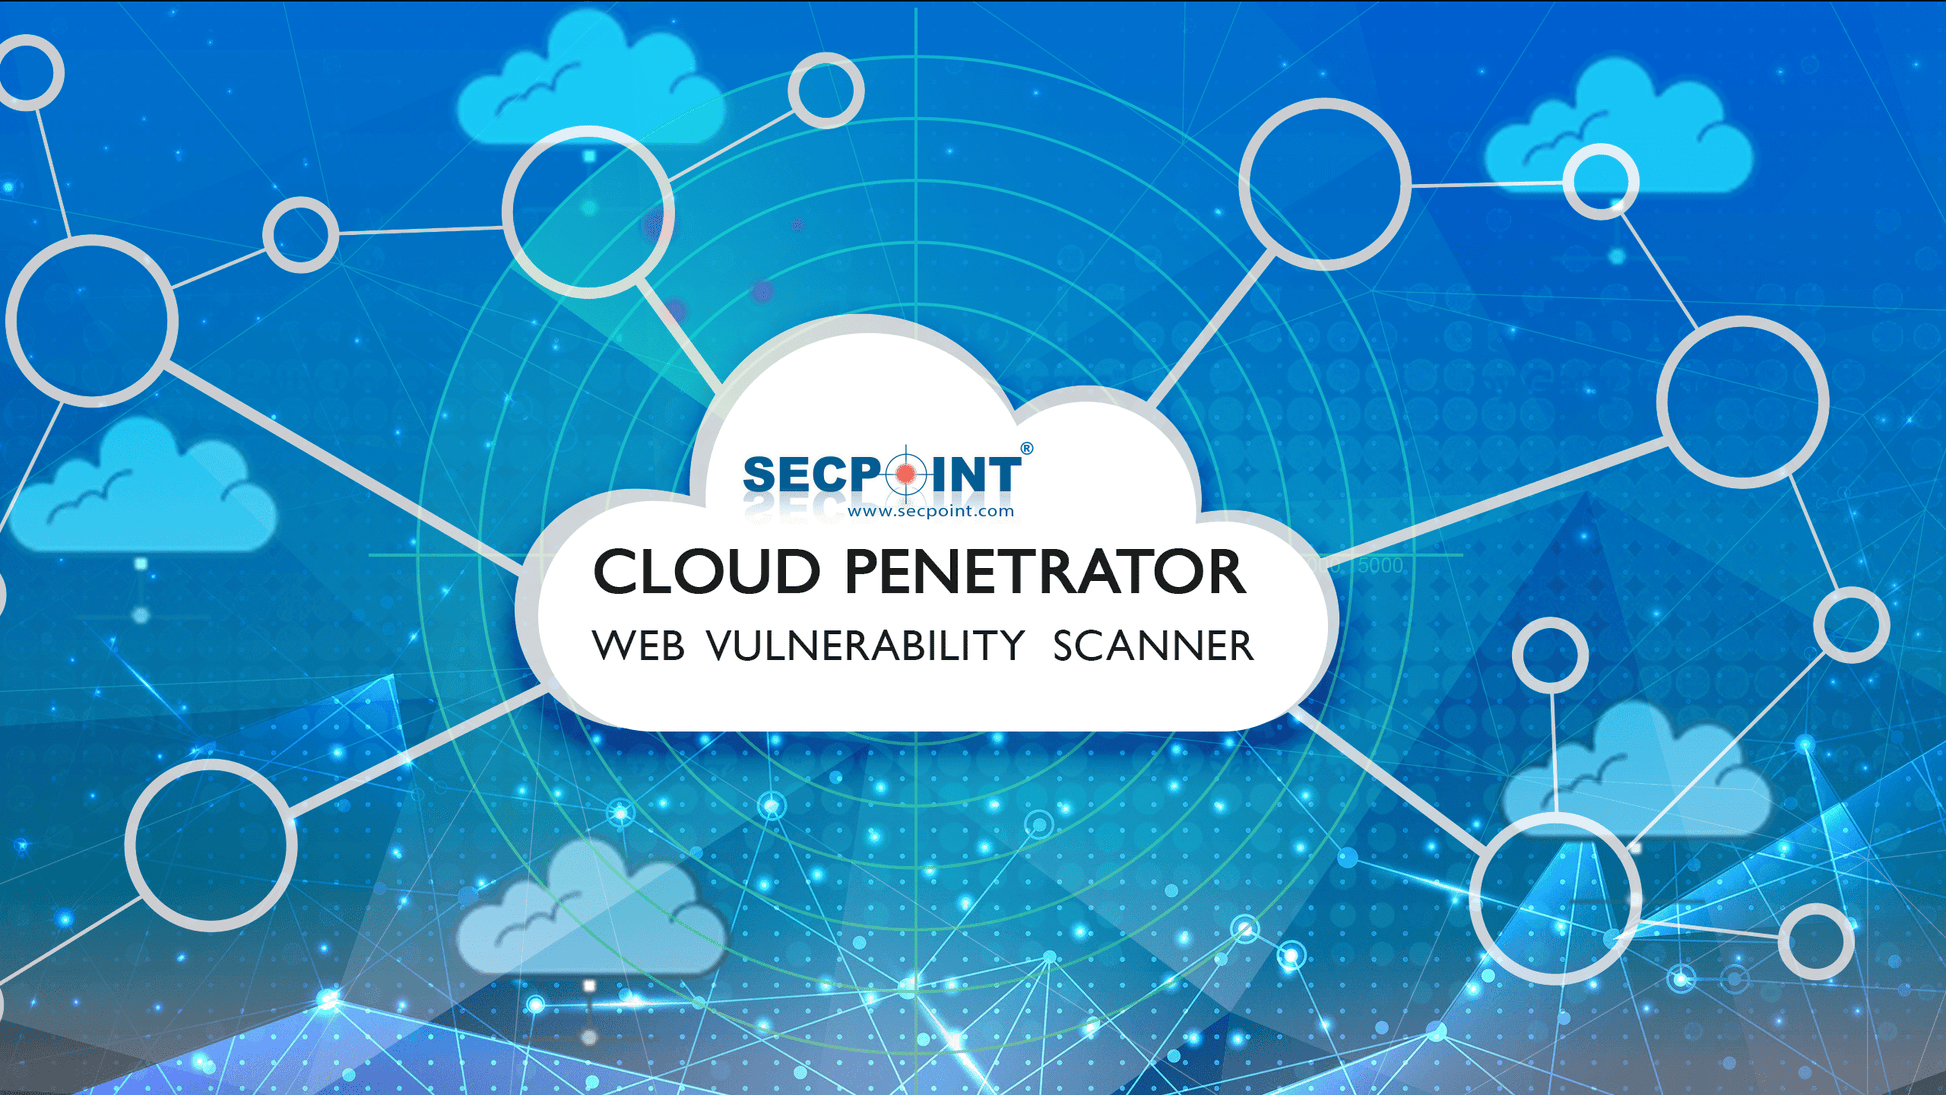 SecPoint Cloud Penetrator S9 - Vulnerability  Scanning of 1 IP for 1Y Renewal Static Scan License - SecPoint